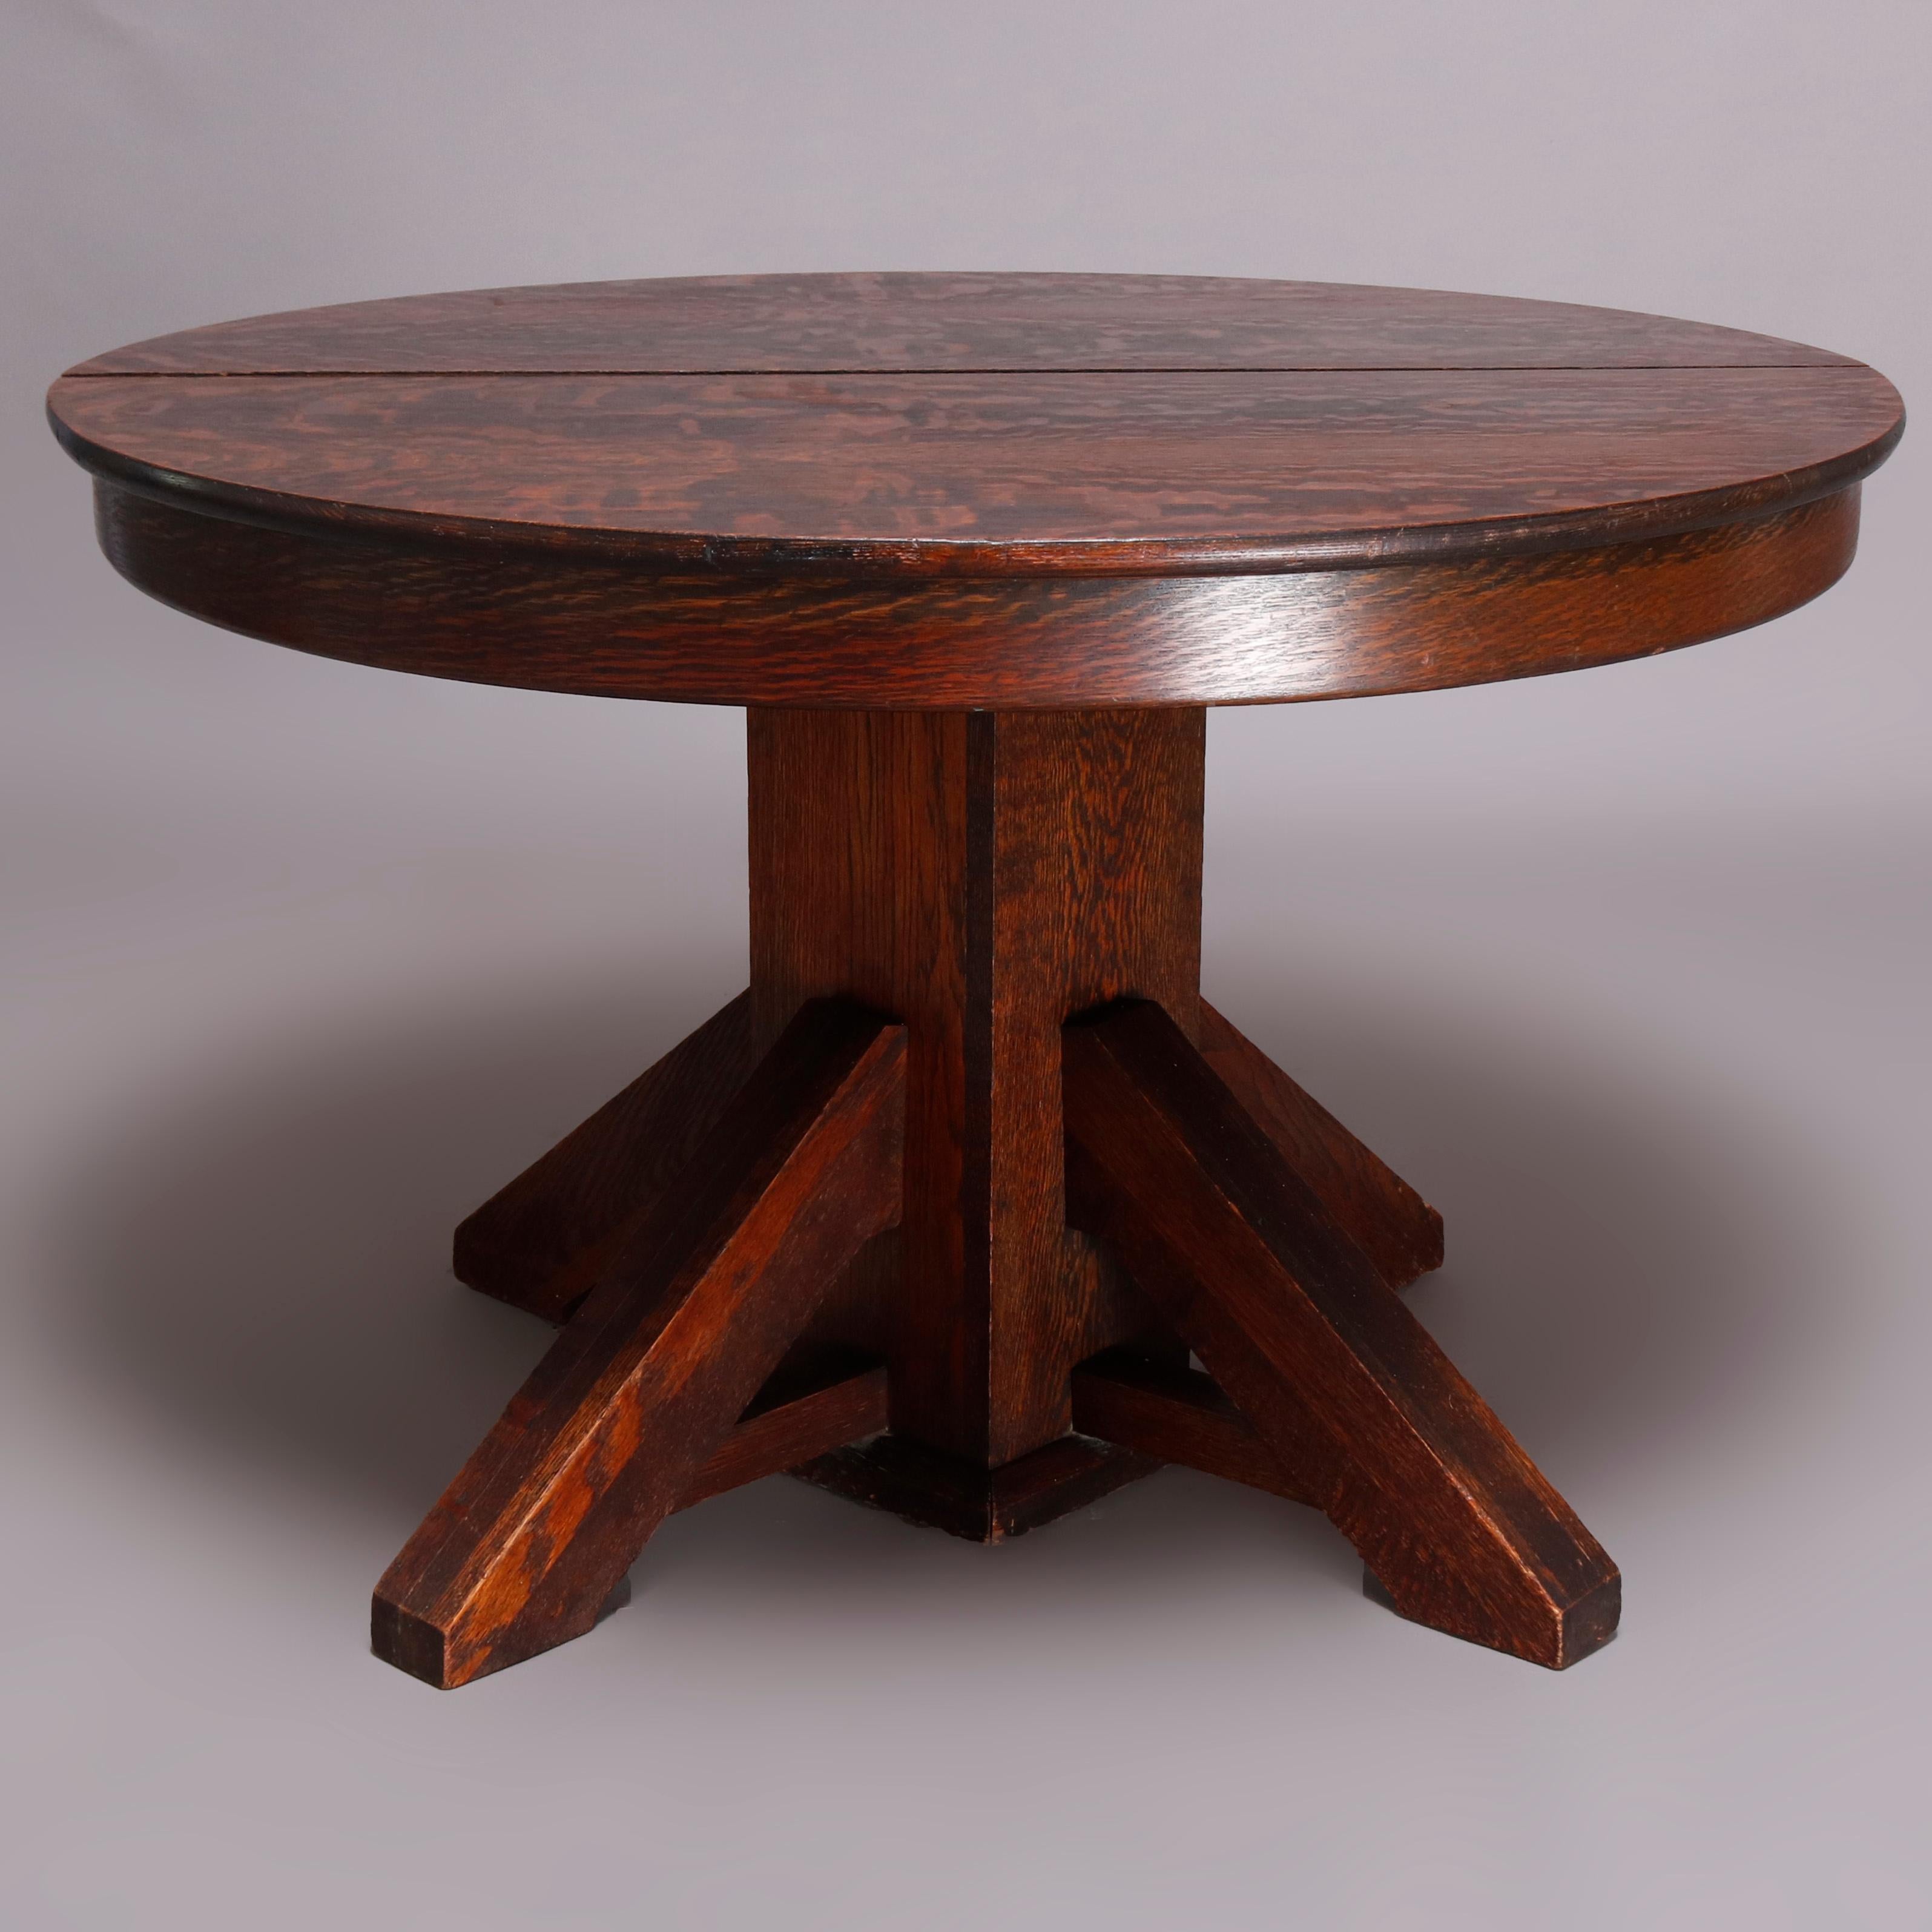 An antique Arts & Crafts mission Stickley style dining table offers quarter sawn oak construction with a round expanding top accepting three leaves and raised on a quadrapod pedestal base, circa 1910.

Measures: 27.75